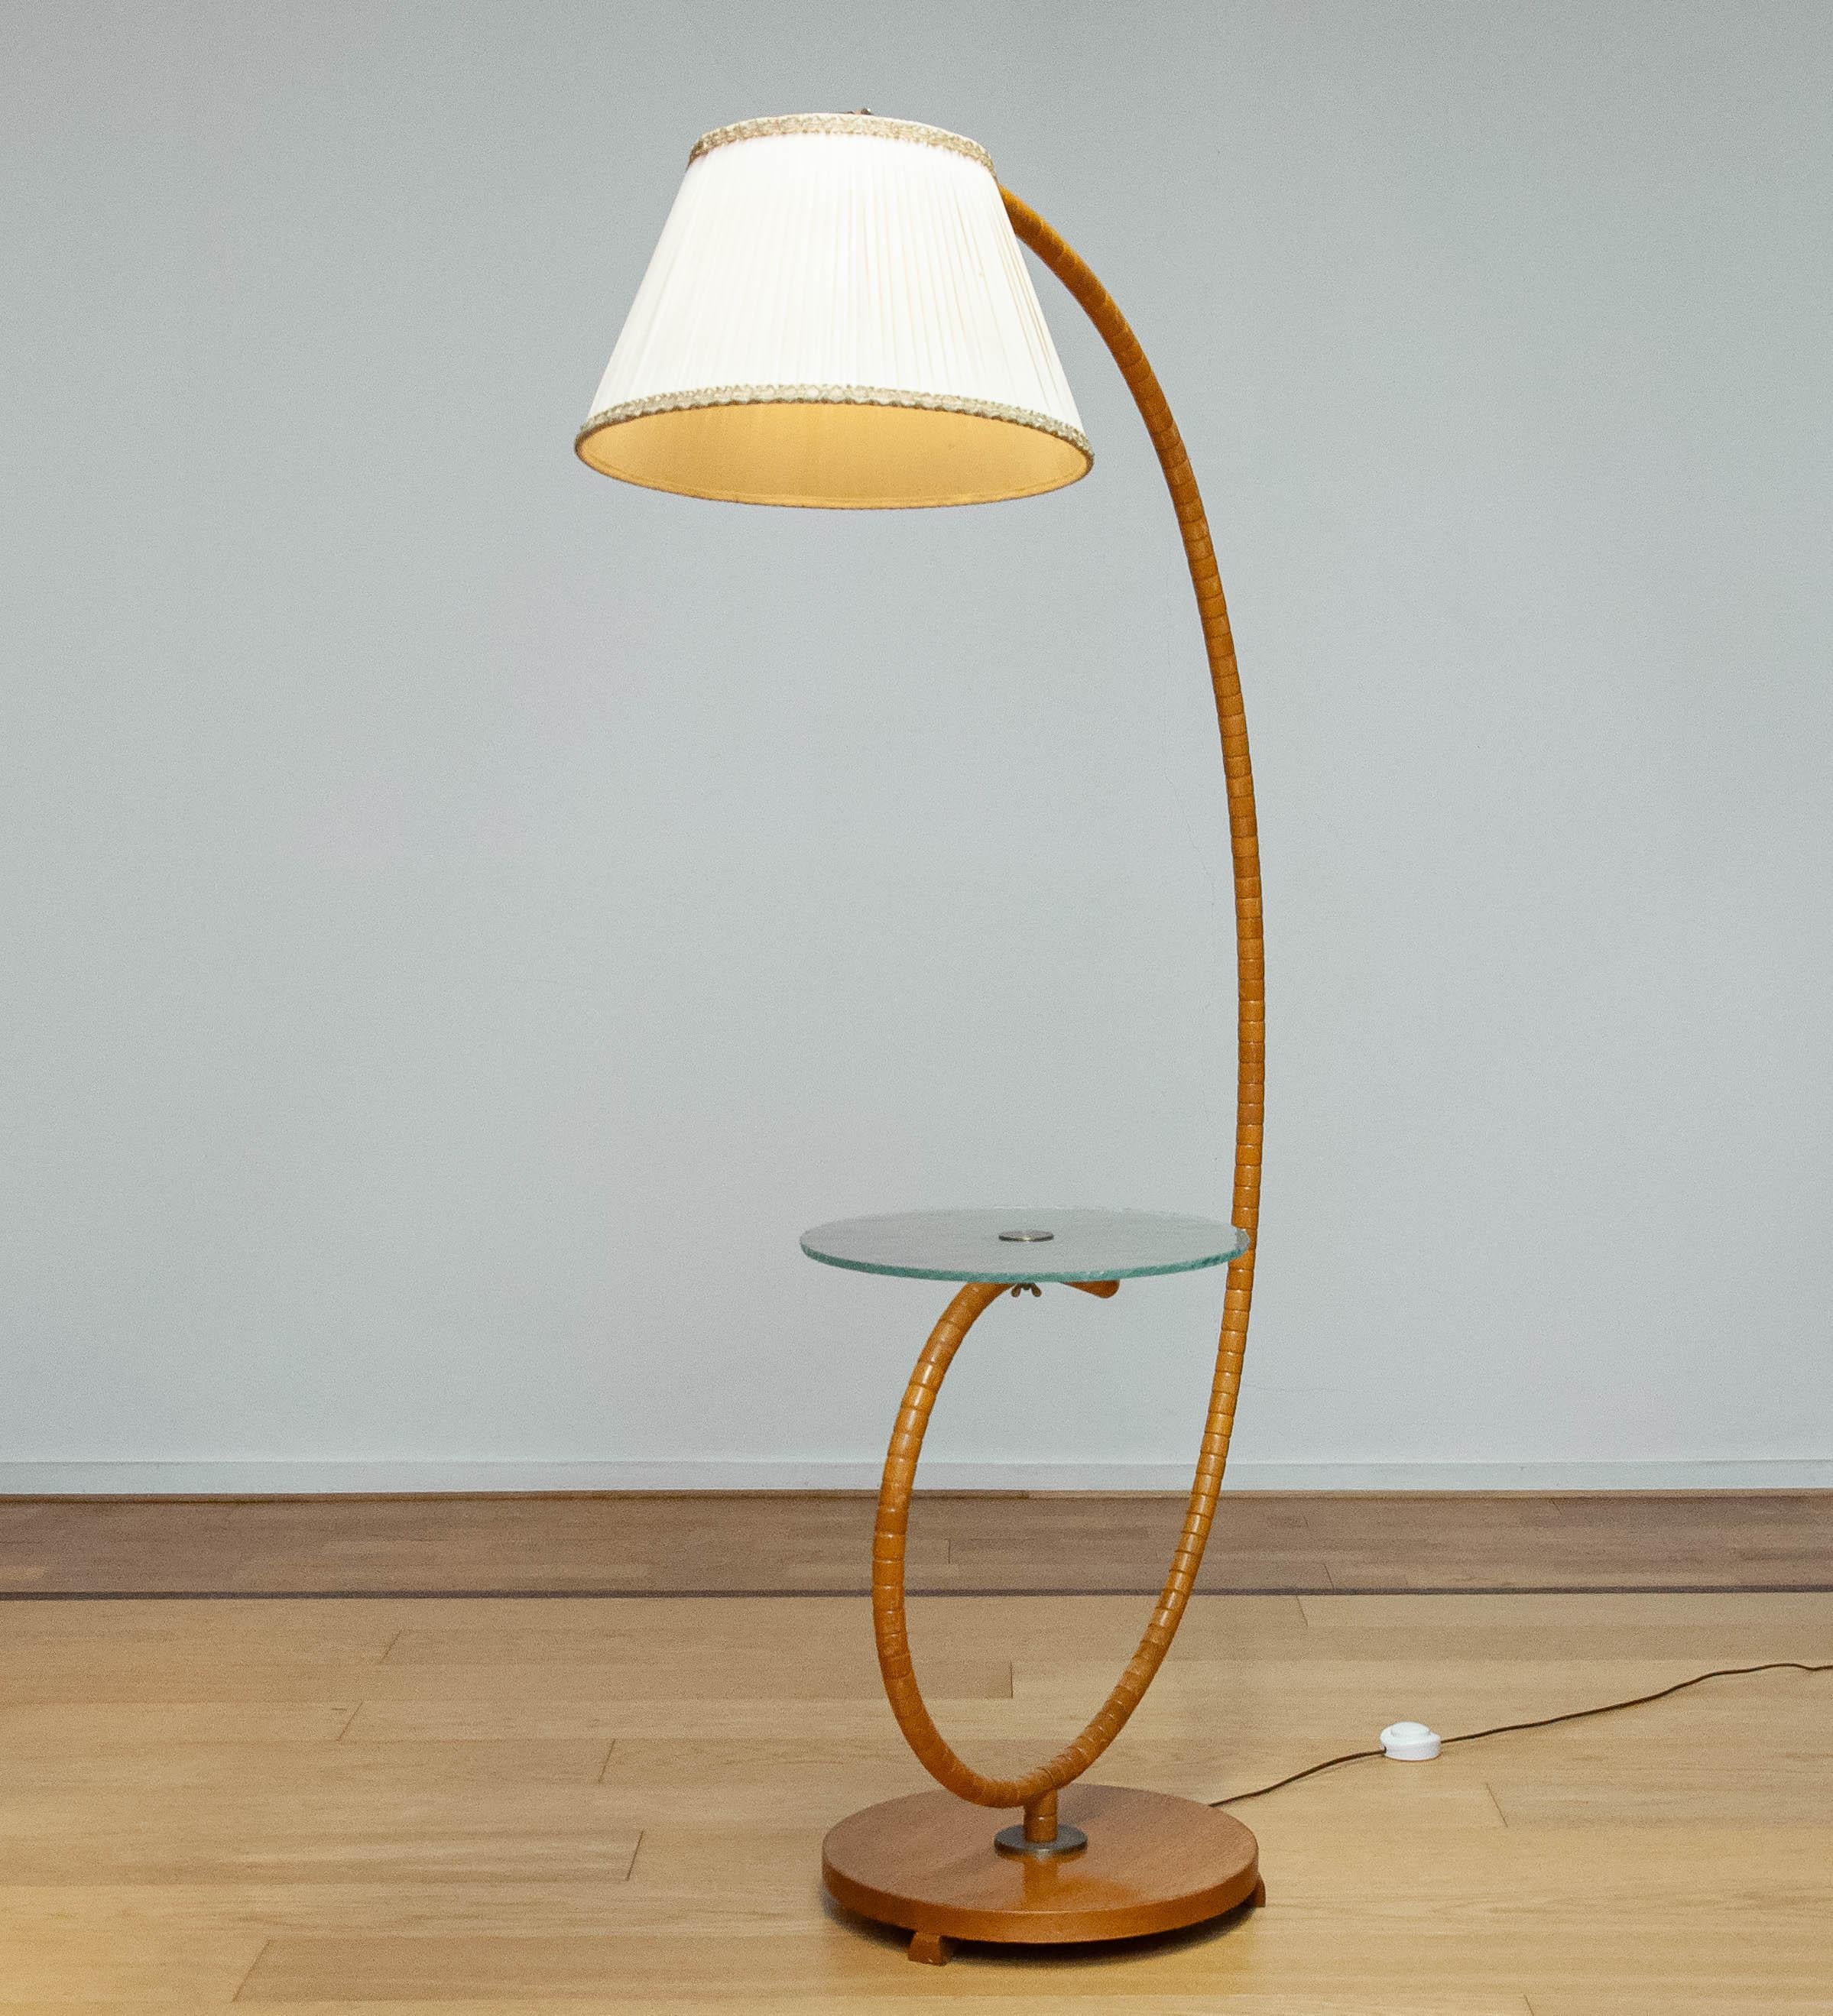 1940 Swedish Art Nouveau Floor Lamp In Elm By IWO Mariestad  And Magazine rack For Sale 10